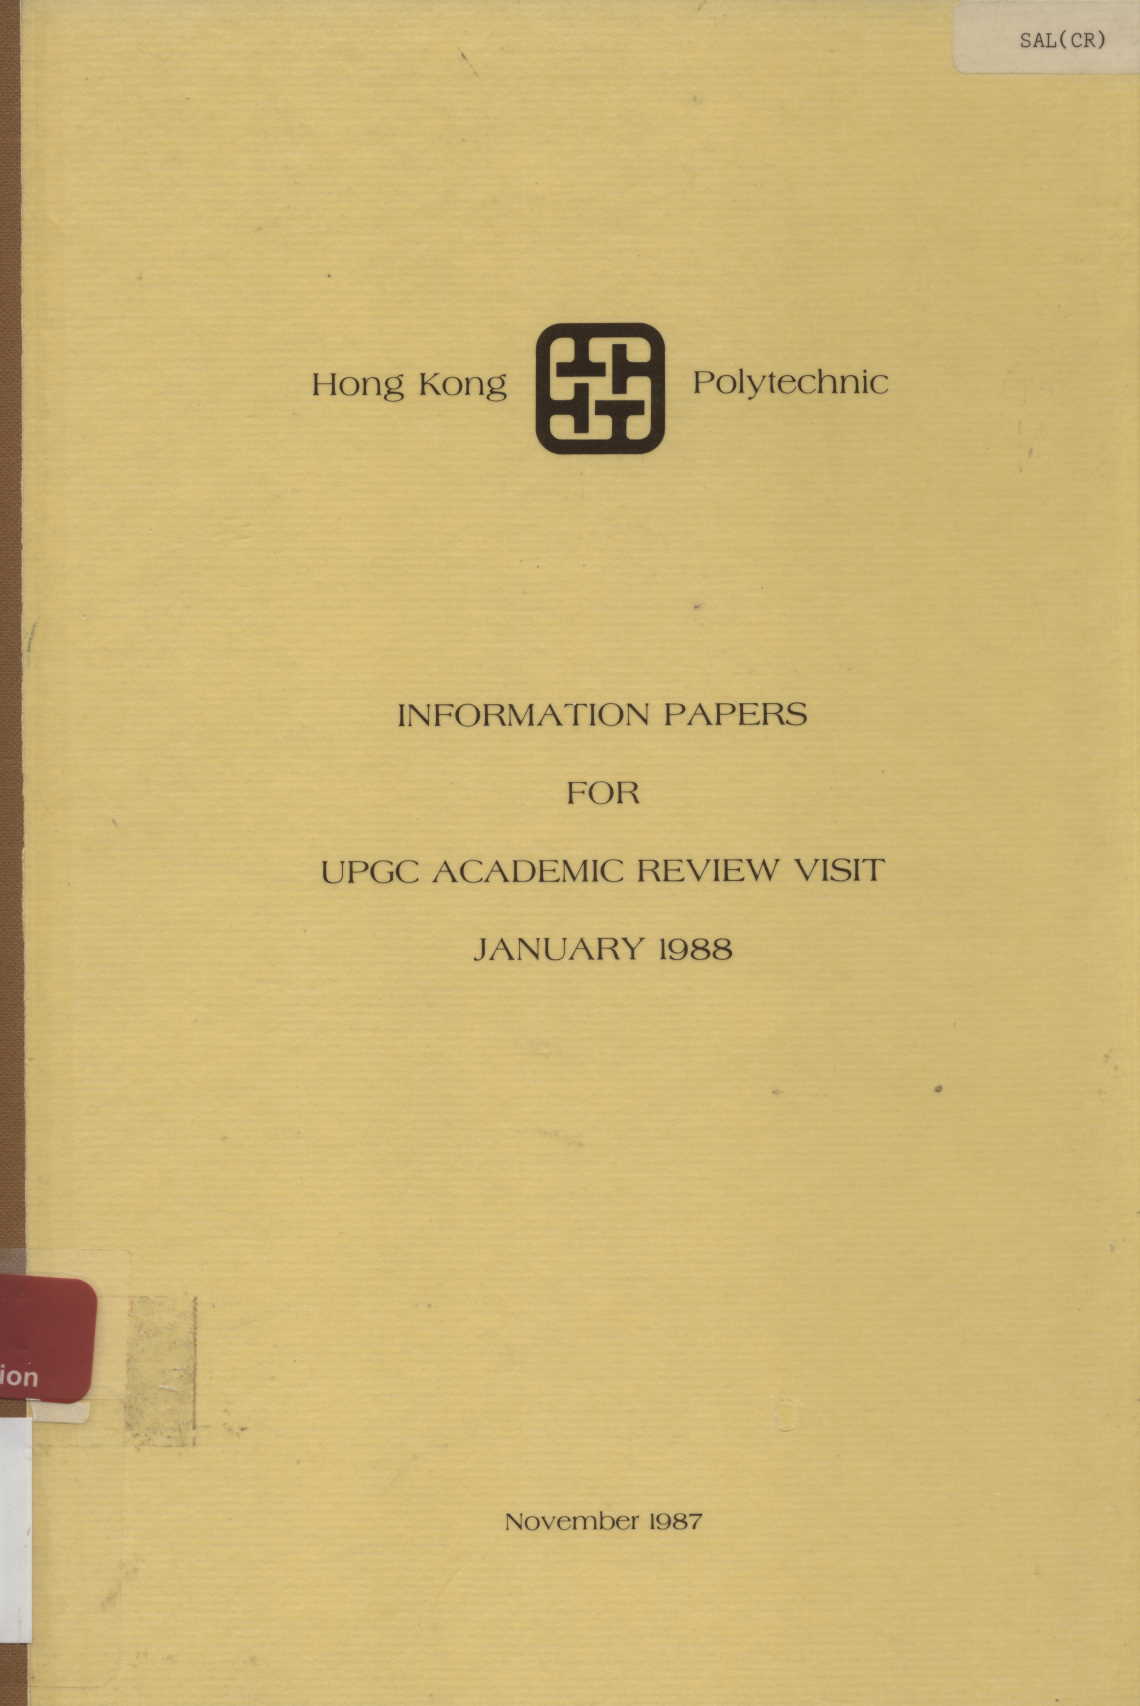 Information papers for UPGC academic review visit January 1988